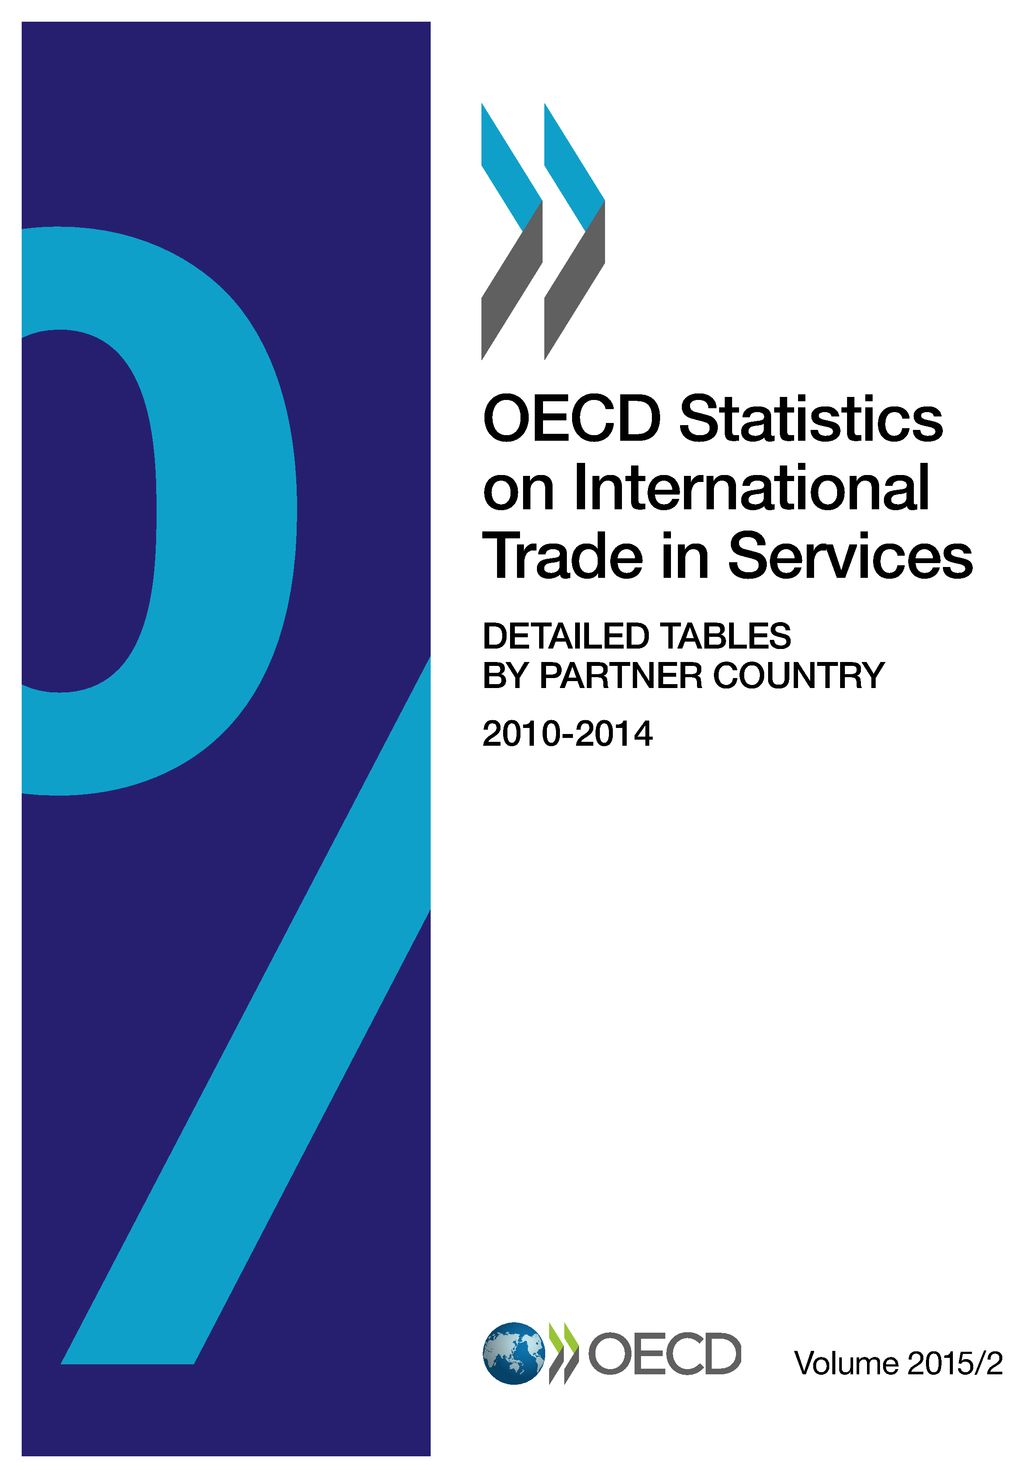 OECD statistics on international trade in services. volume 2015/2, Detailed tables by partner country 2010-2014 / OECD.